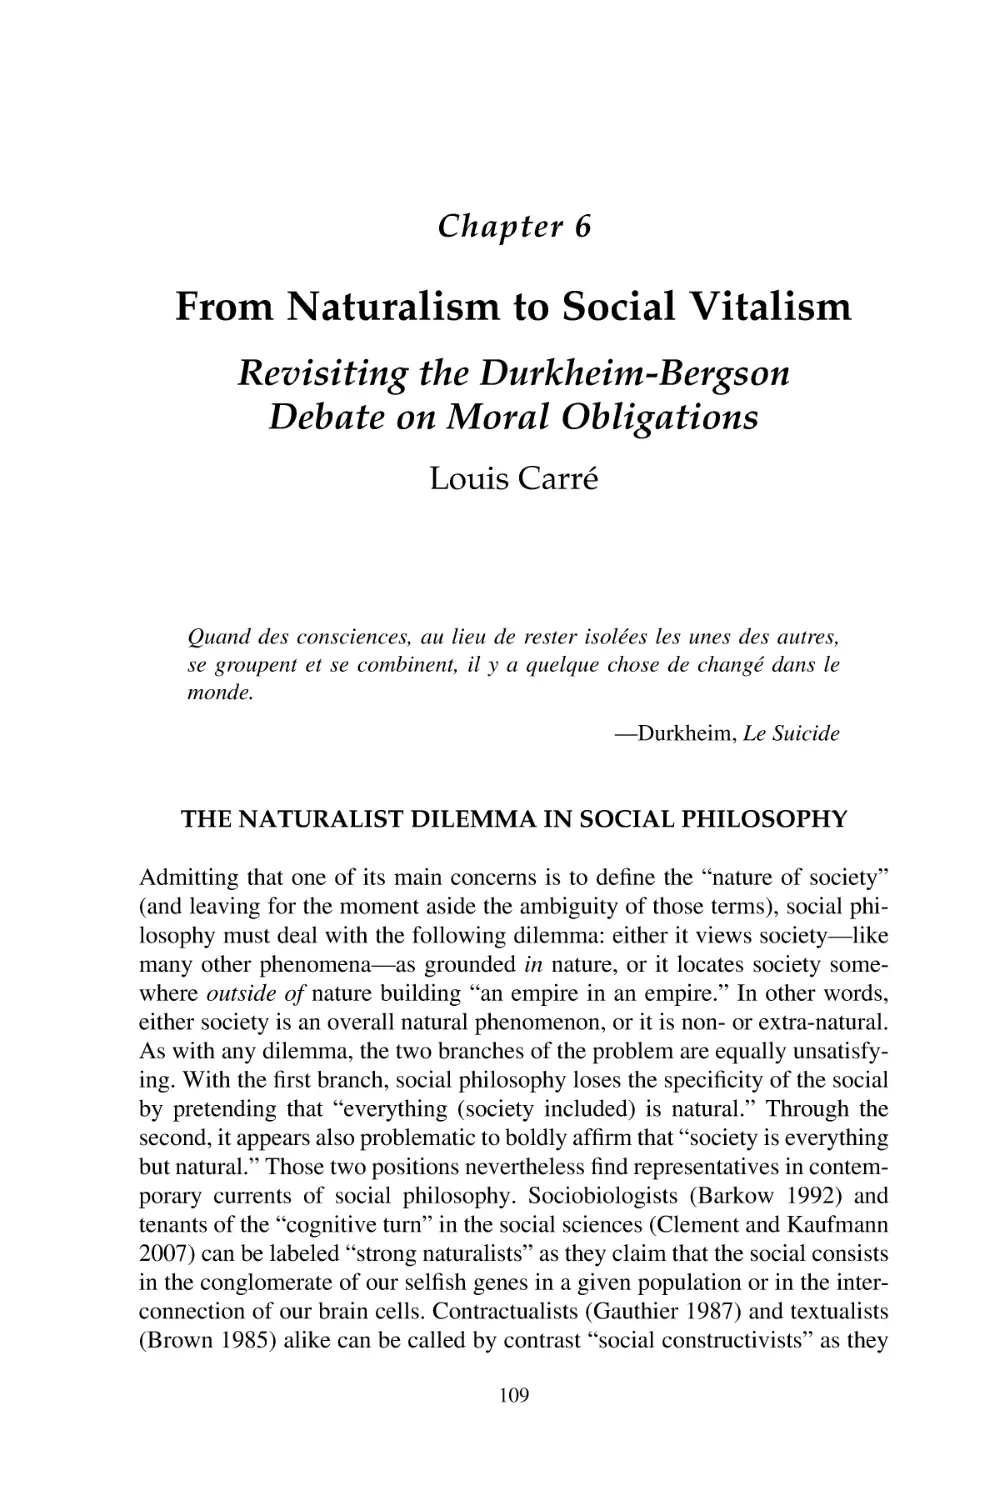 6 From Naturalism to Social Vitalism